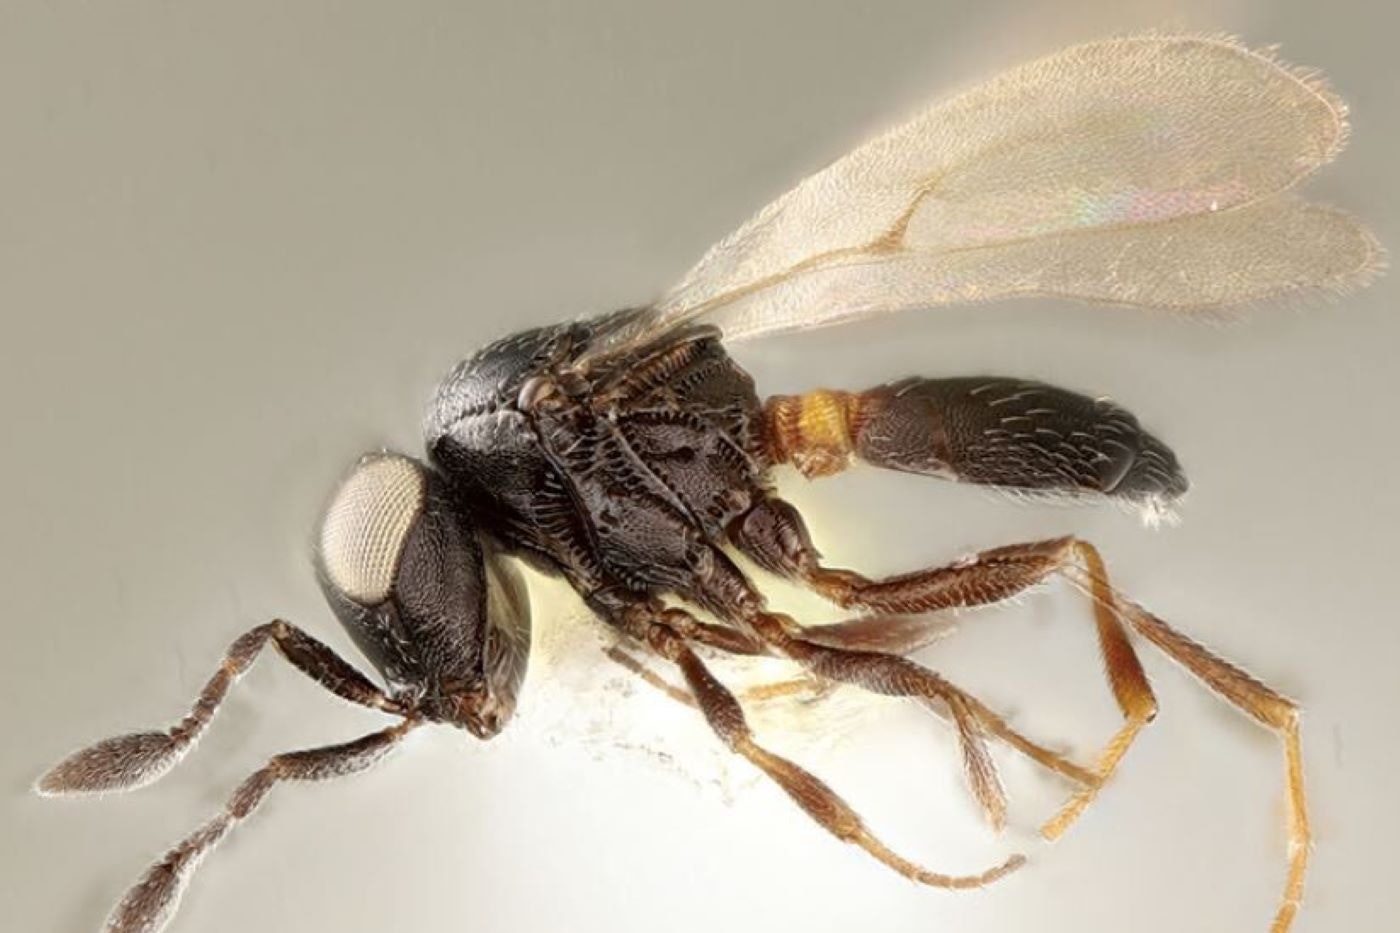 New wasp species named after Idris Elba - Ealing Times